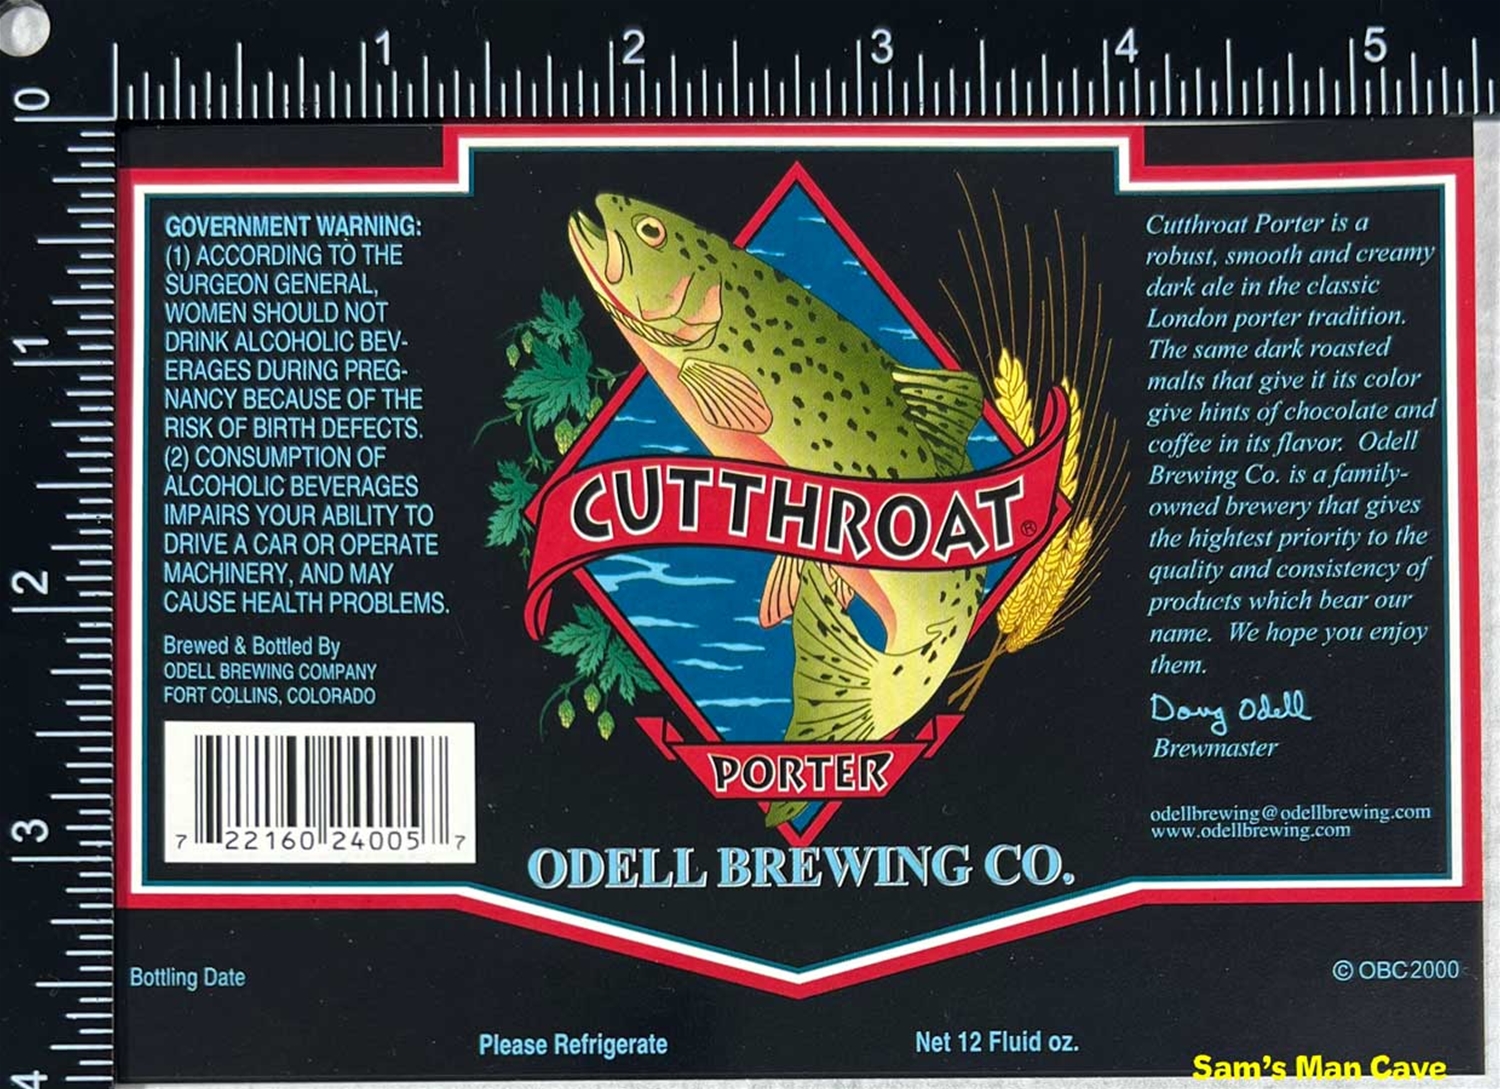 Odell Brewing Cutthroat Porter Label